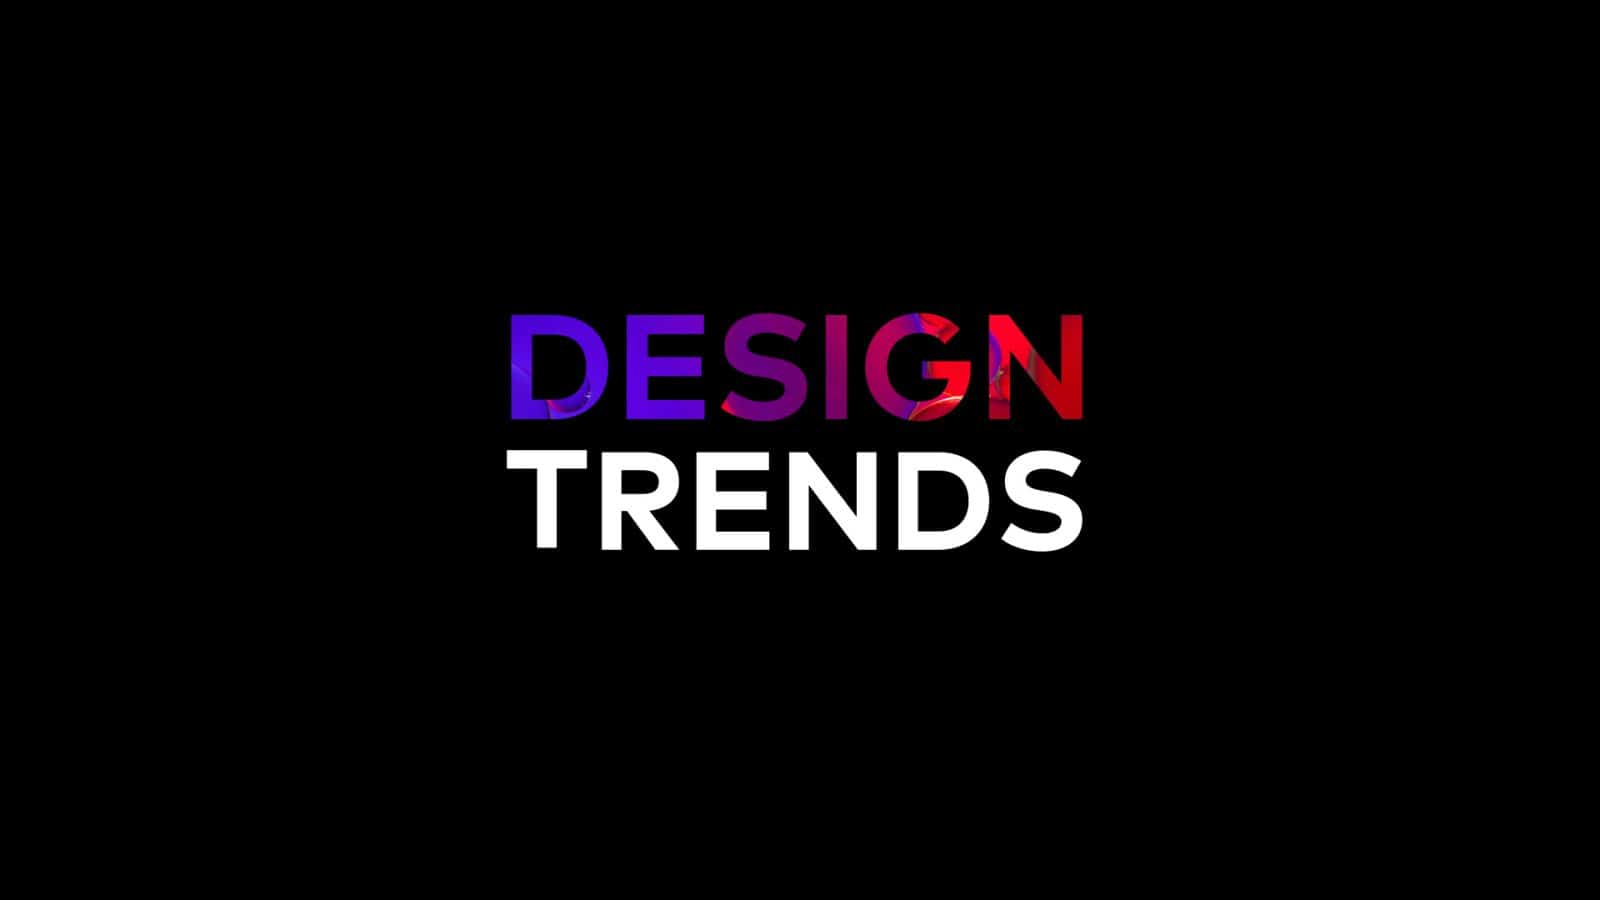 Graphic Design Trends to Keep an Eye on